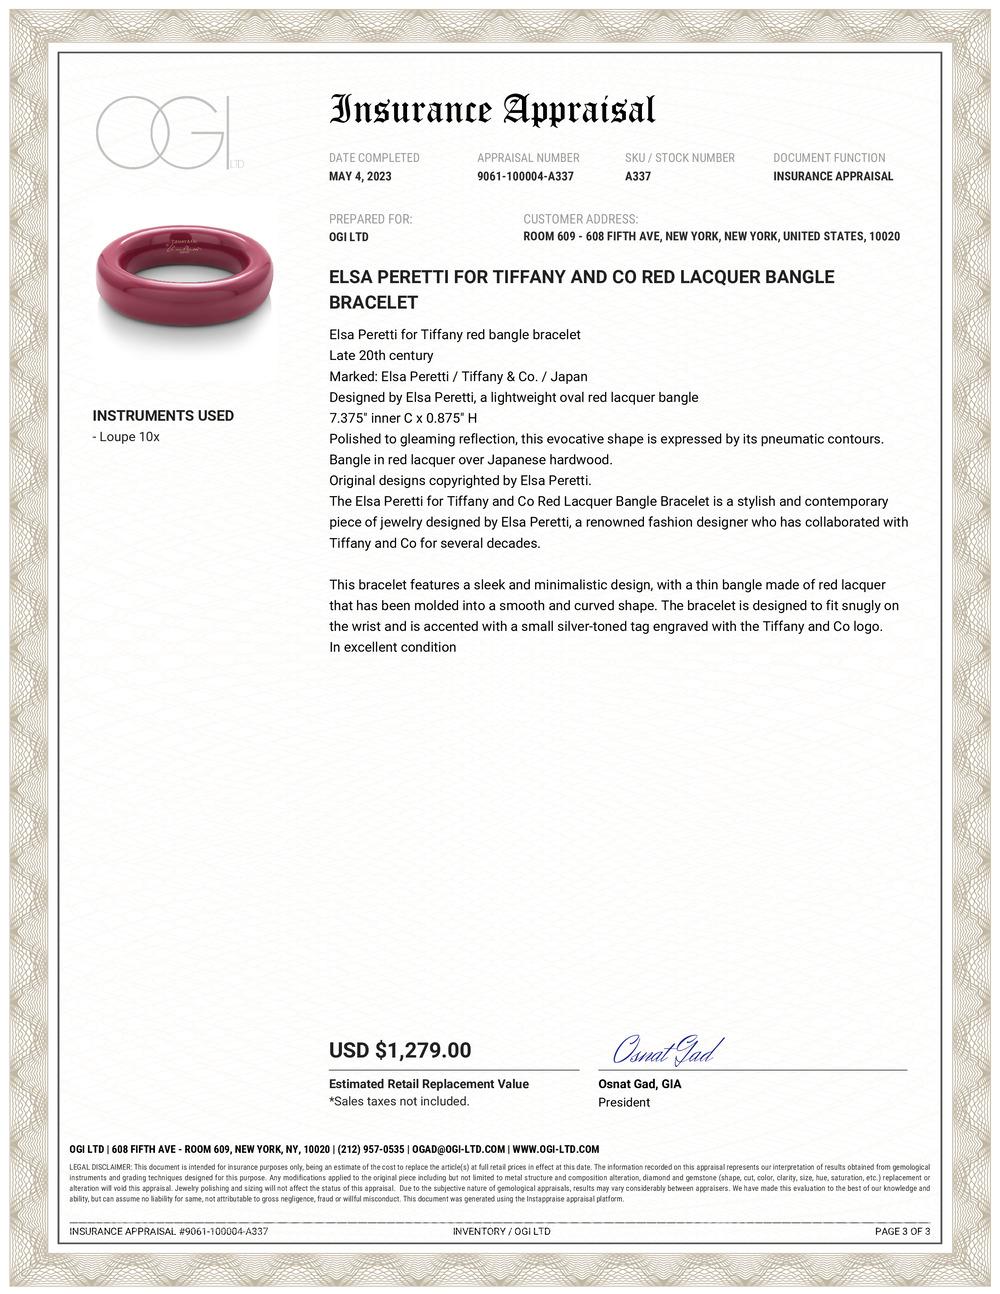 Elsa Peretti for Tiffany red bangle bracelet
Late 20th century
Marked: Elsa Peretti / Tiffany & Co. / Japan
Designed by Elsa Peretti, a lightweight oval red lacquer bangle
7.375